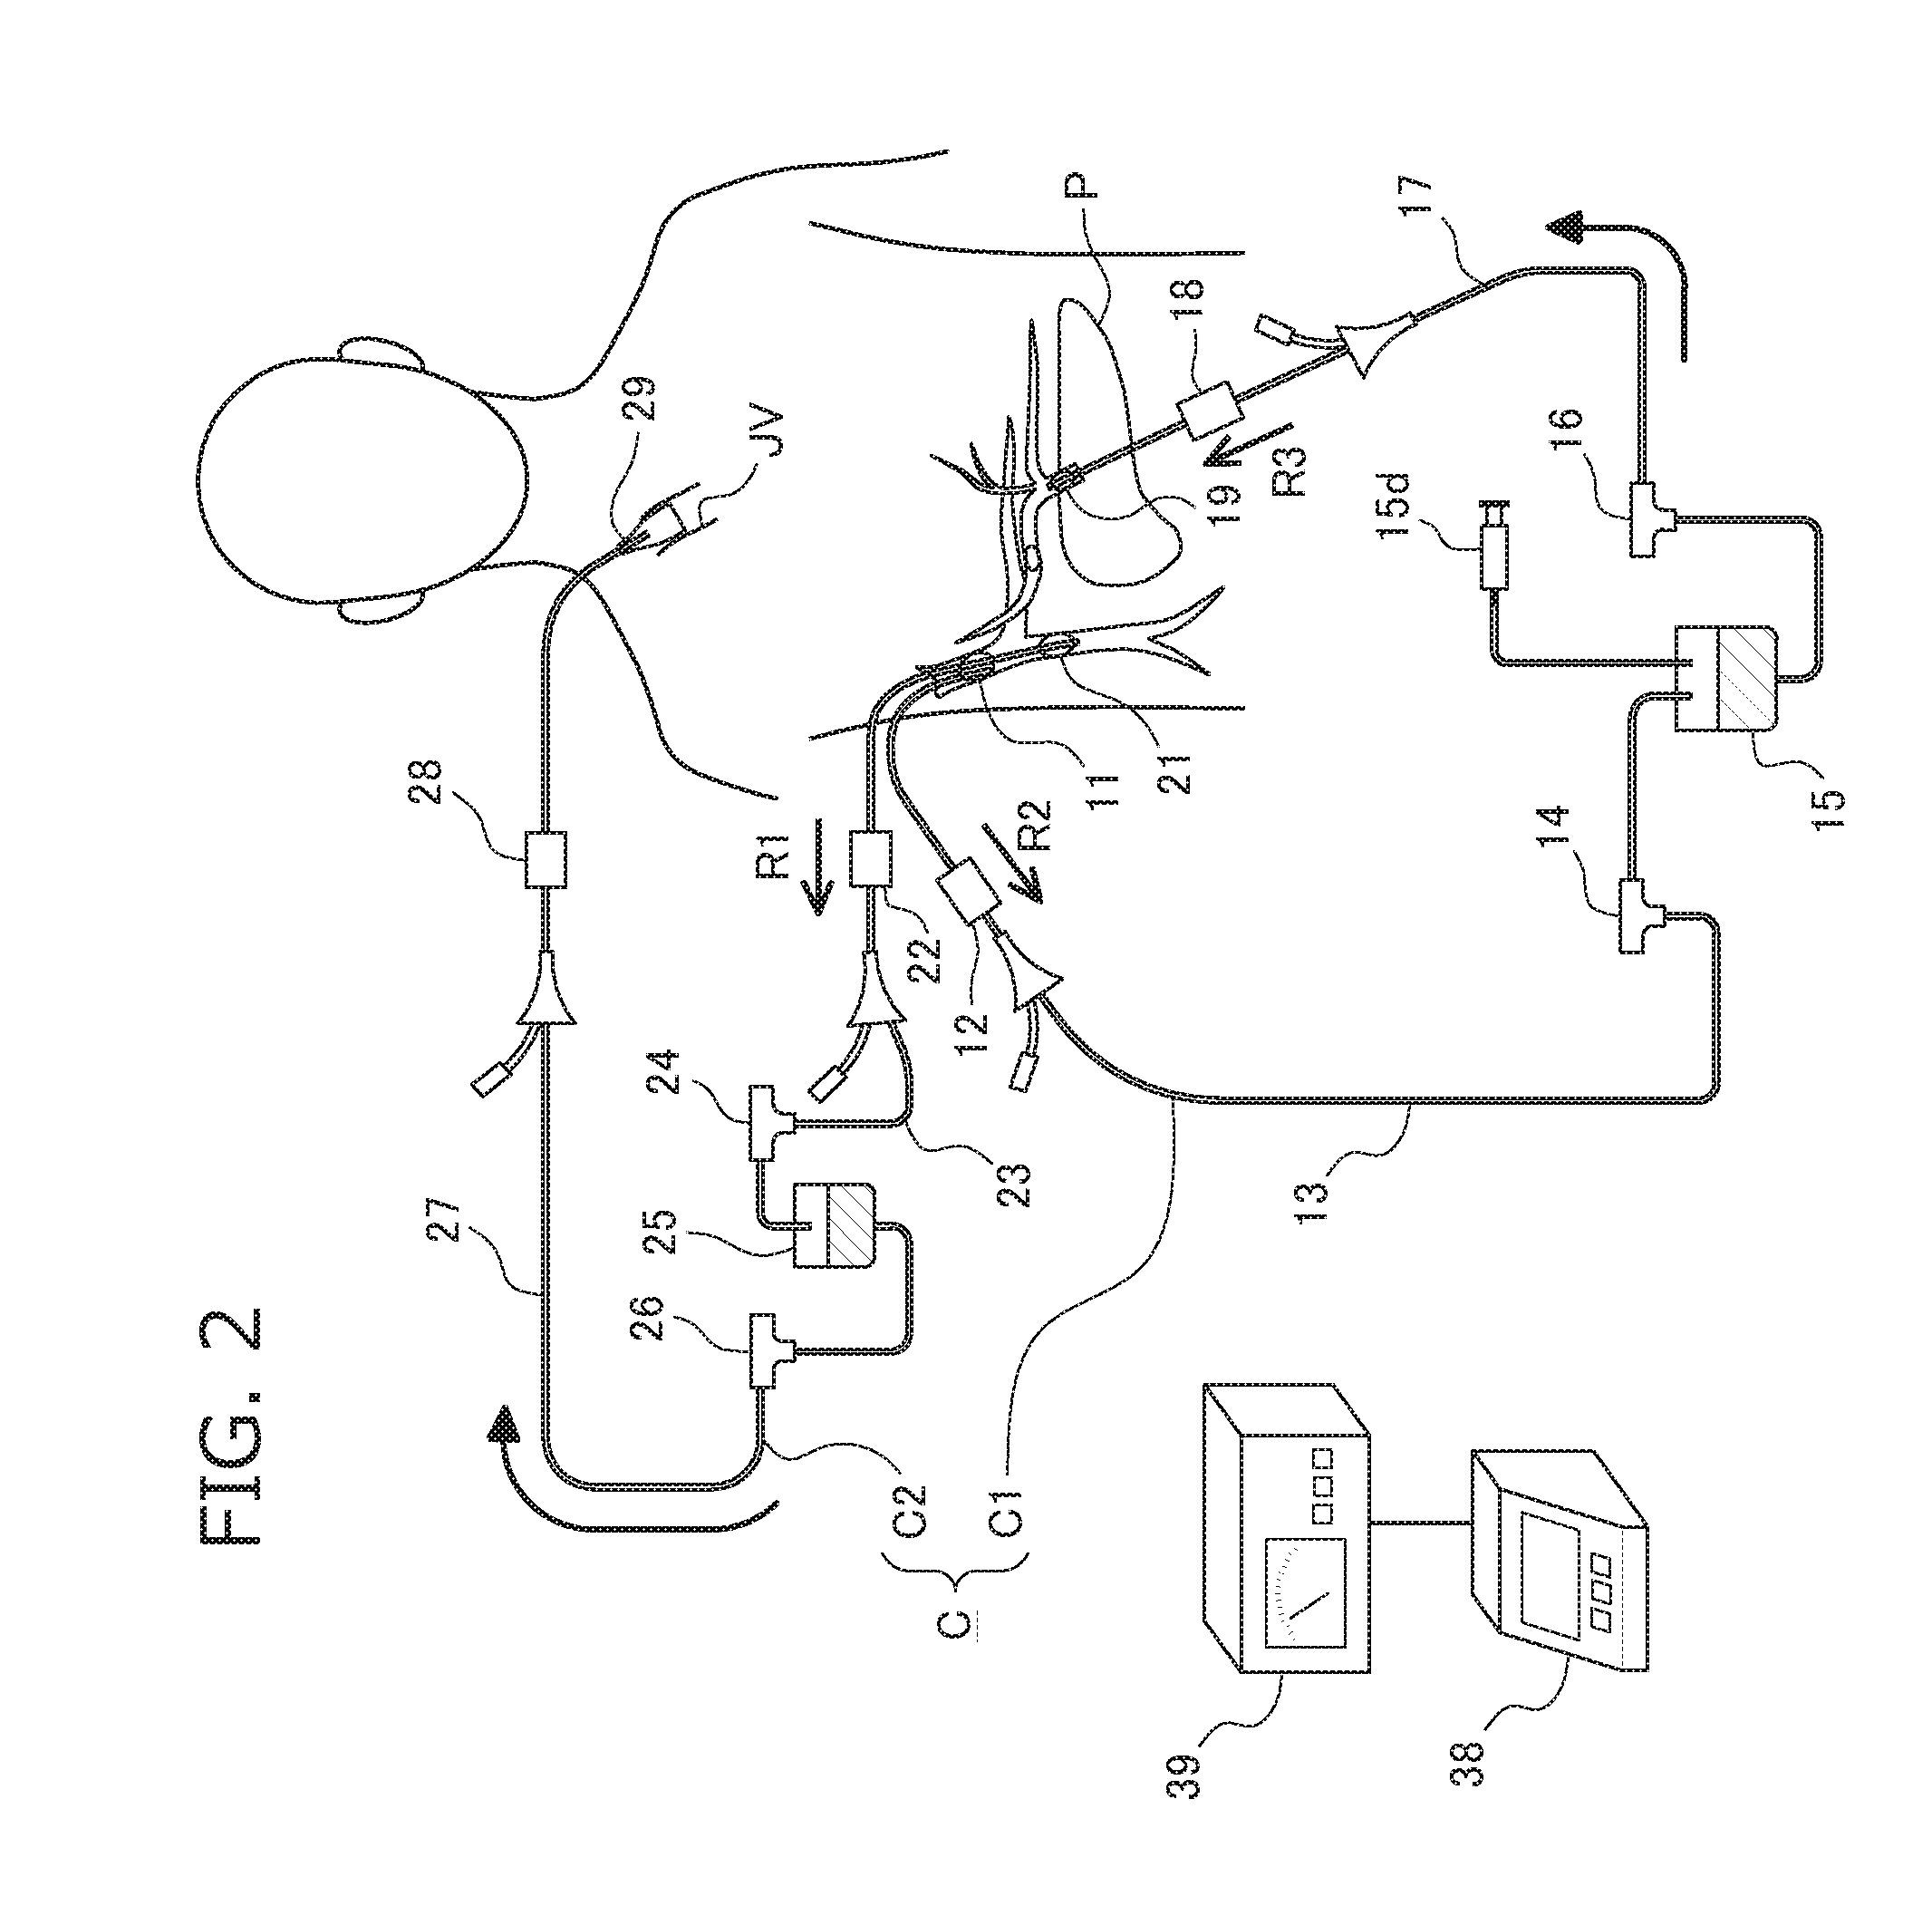 Pancreas perfusion device, method for controlling same, and method for pancreas perfusion